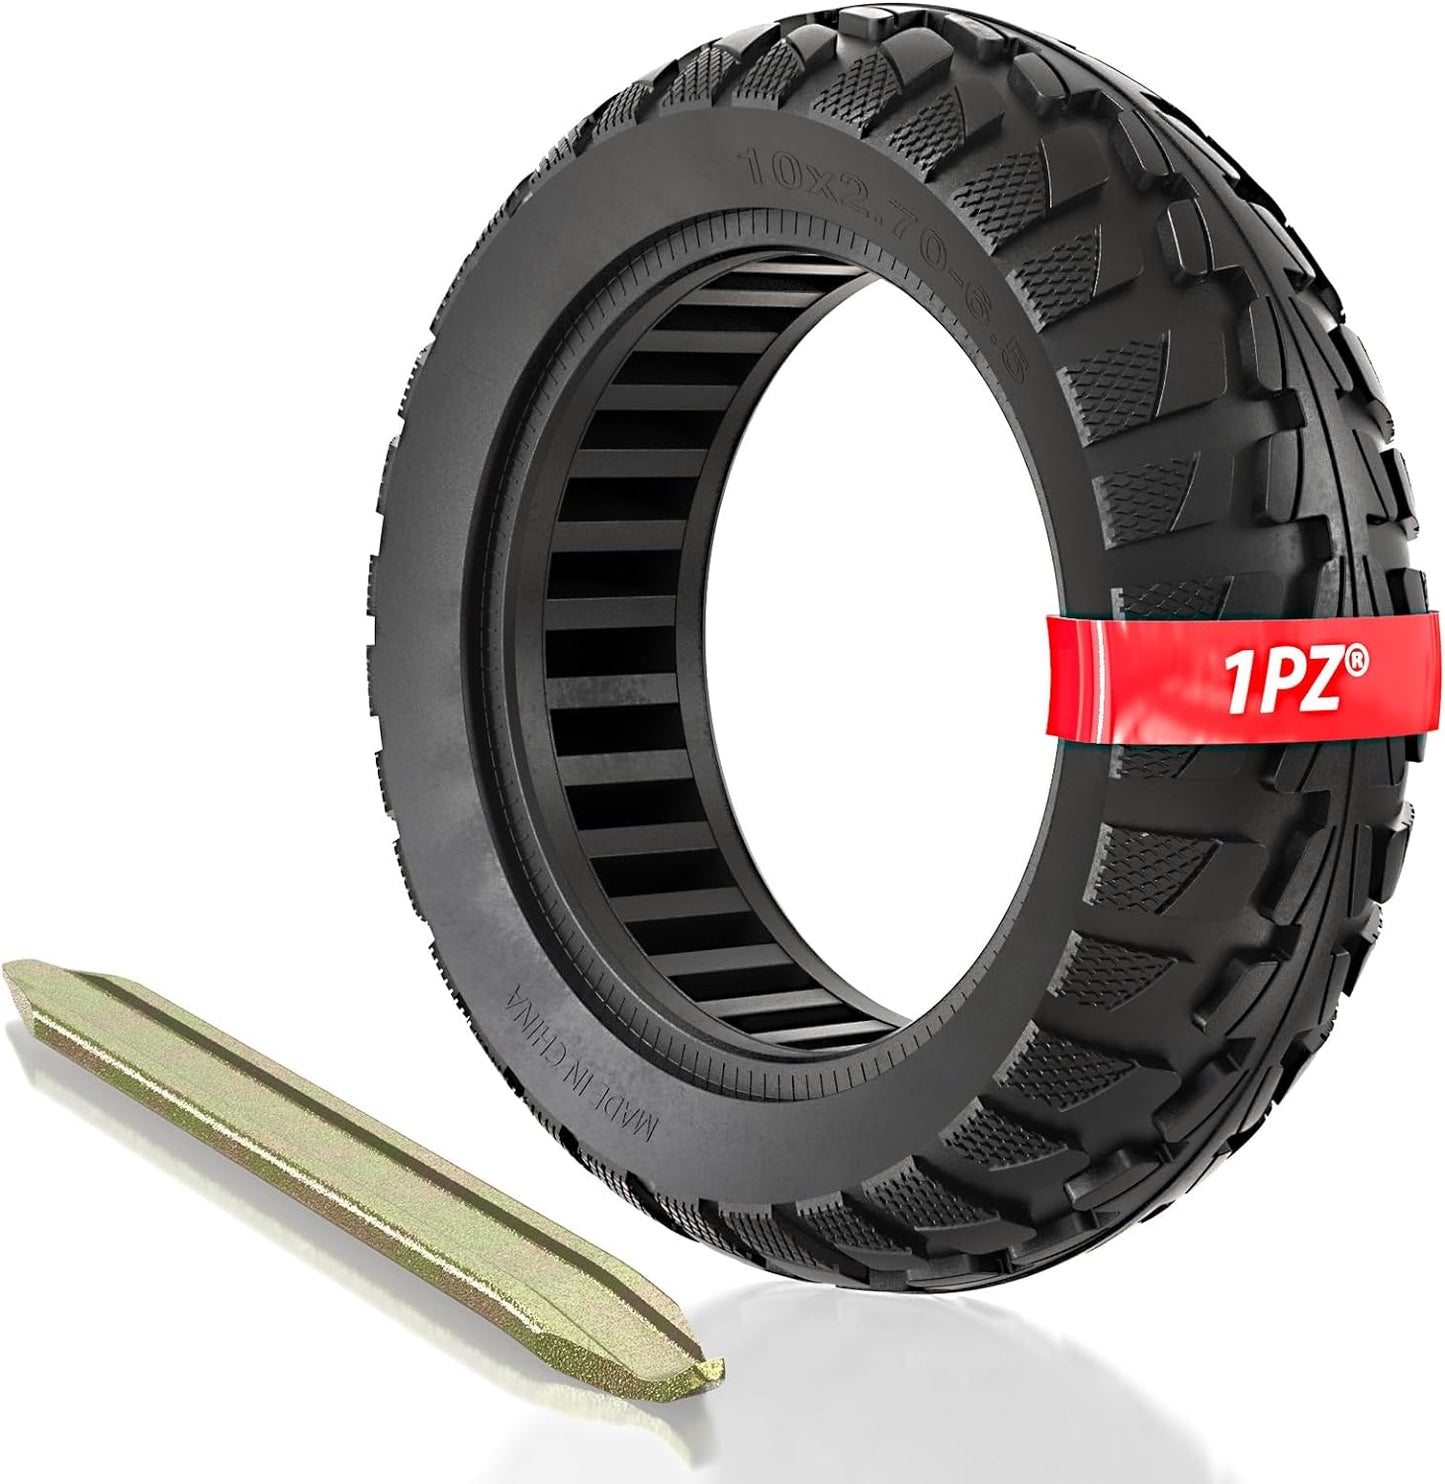 1PZ MI0-J2R 10x2.70-6.5 Solid Tire 70/65-6.5 Tire Replacement for Segway Max G30 G2 Gotrax G MAX Electric Scooter Wheels